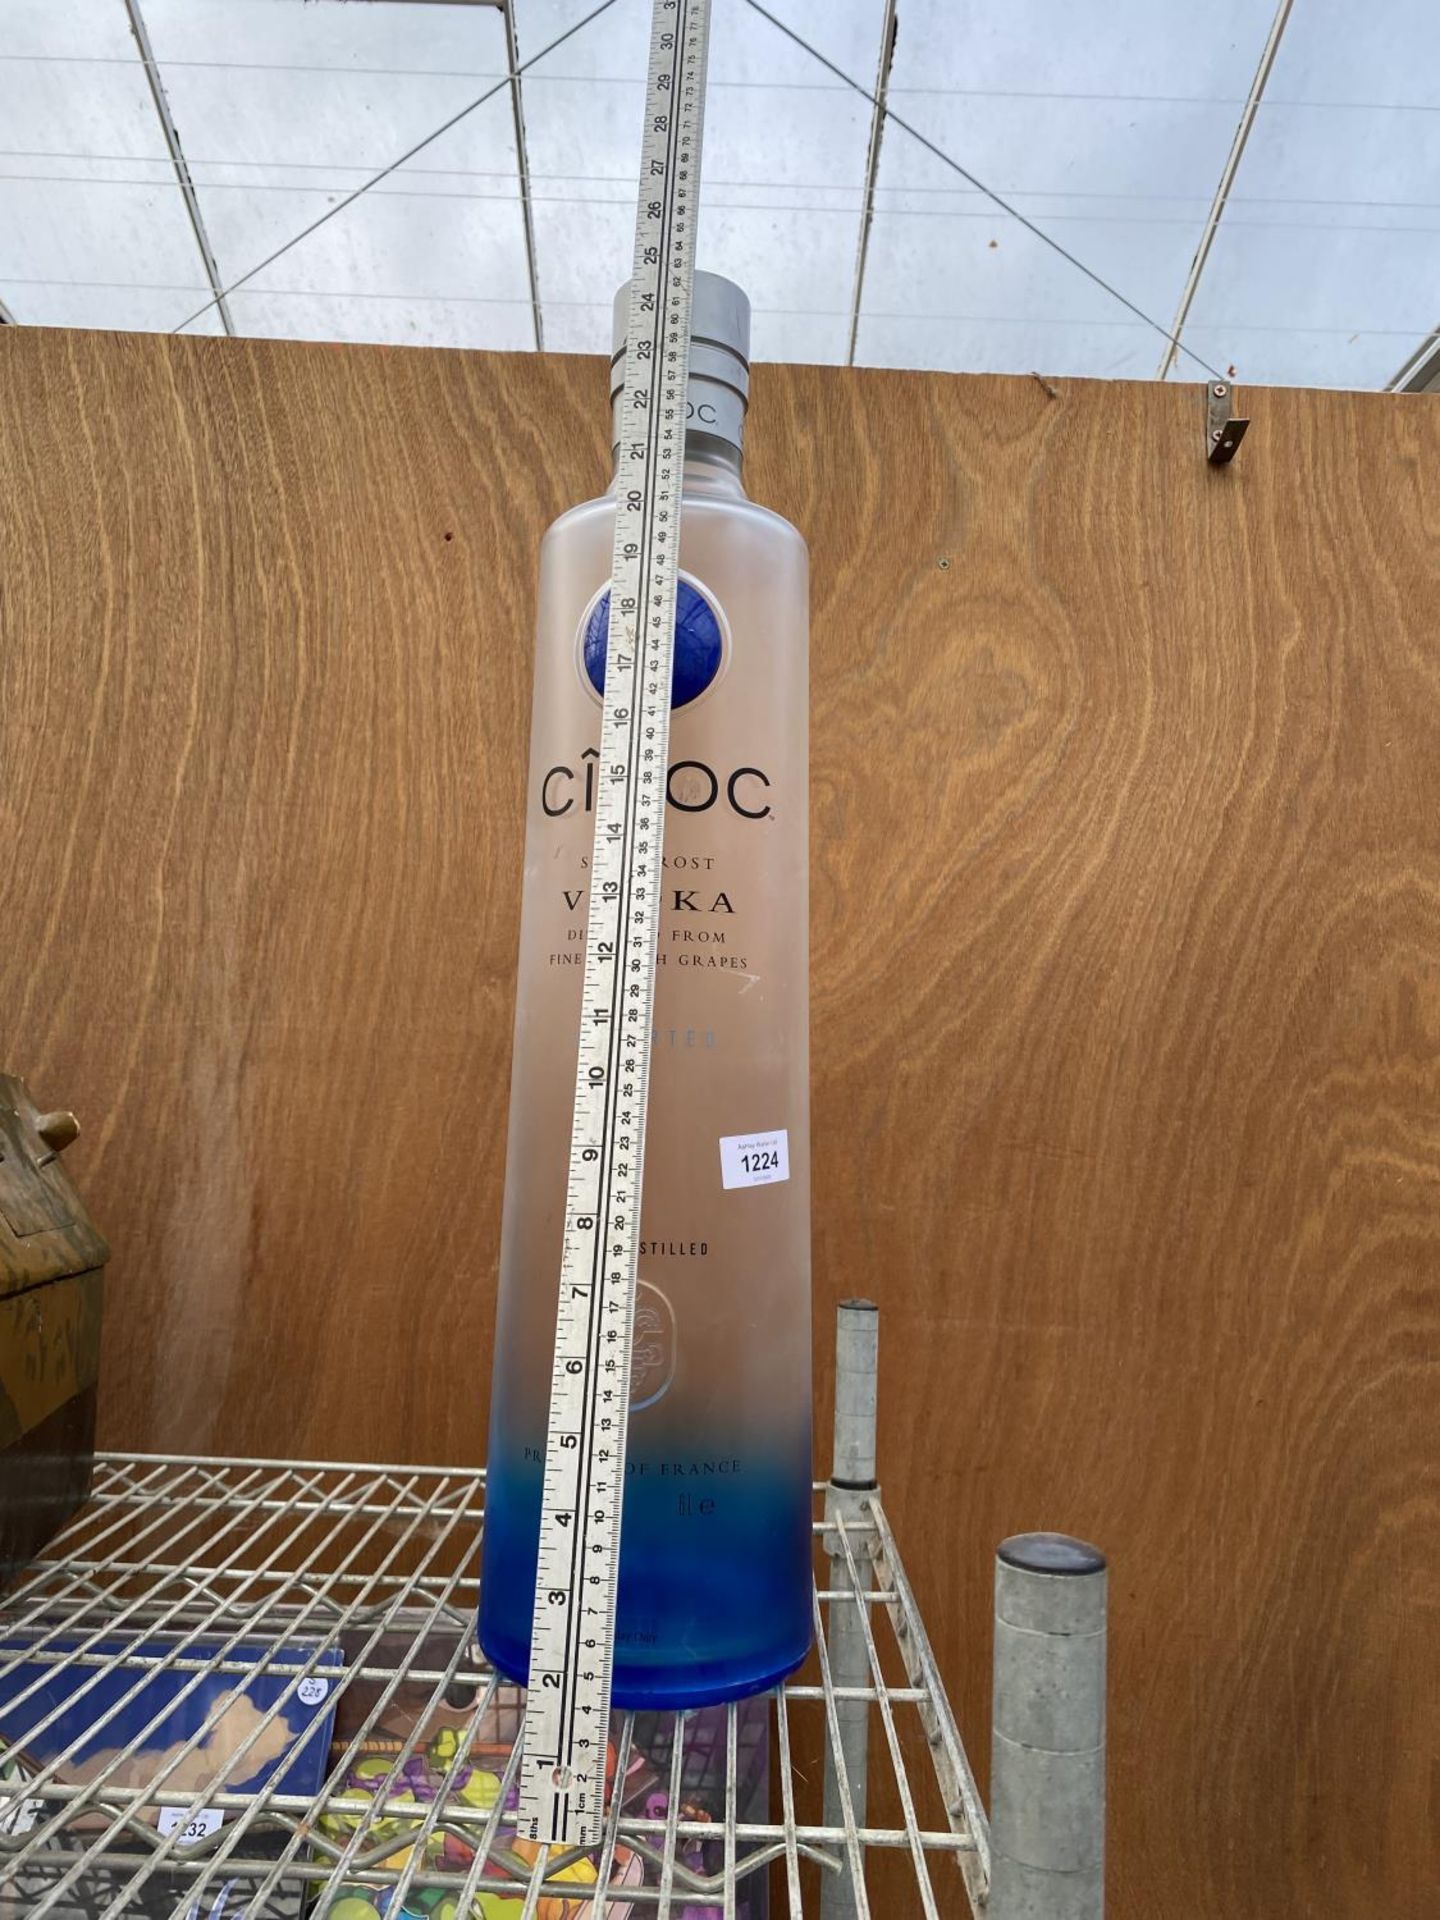 A LARGE PLASTIC 'CIROC' SHOP ADVERTISING BOTTLE - Image 2 of 2